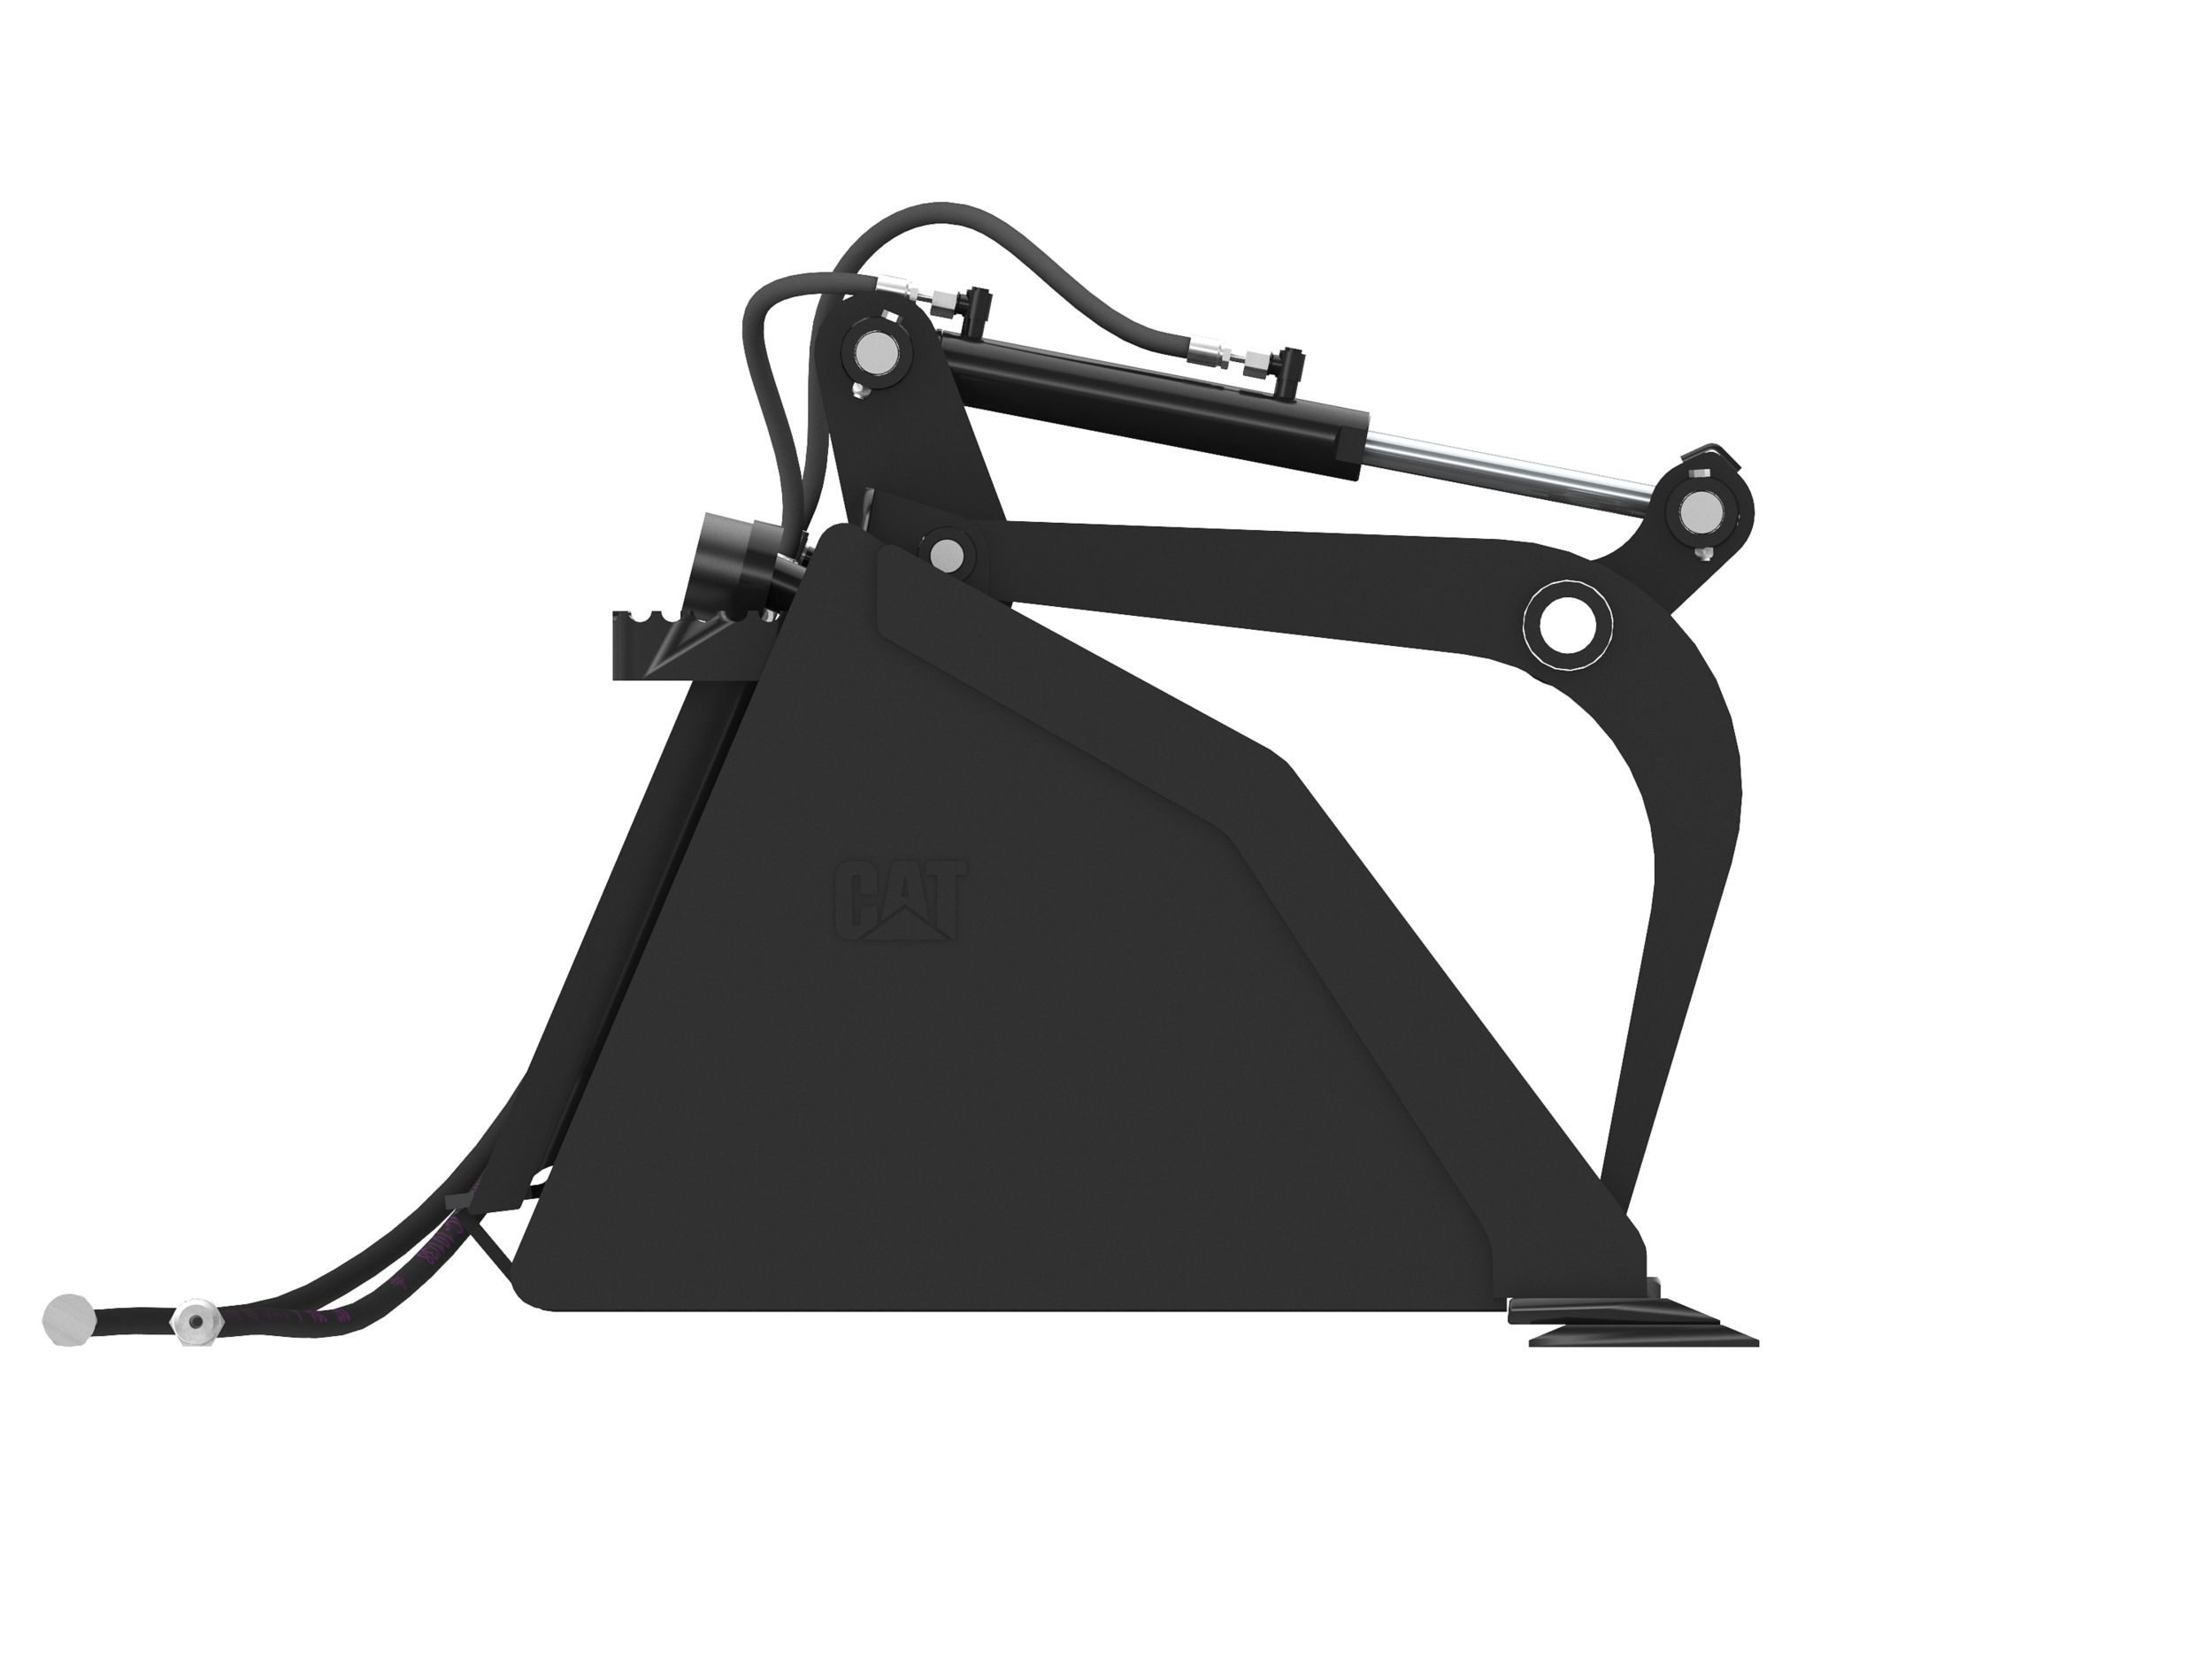 Utility Grapple Buckets 1730 mm (68 in)